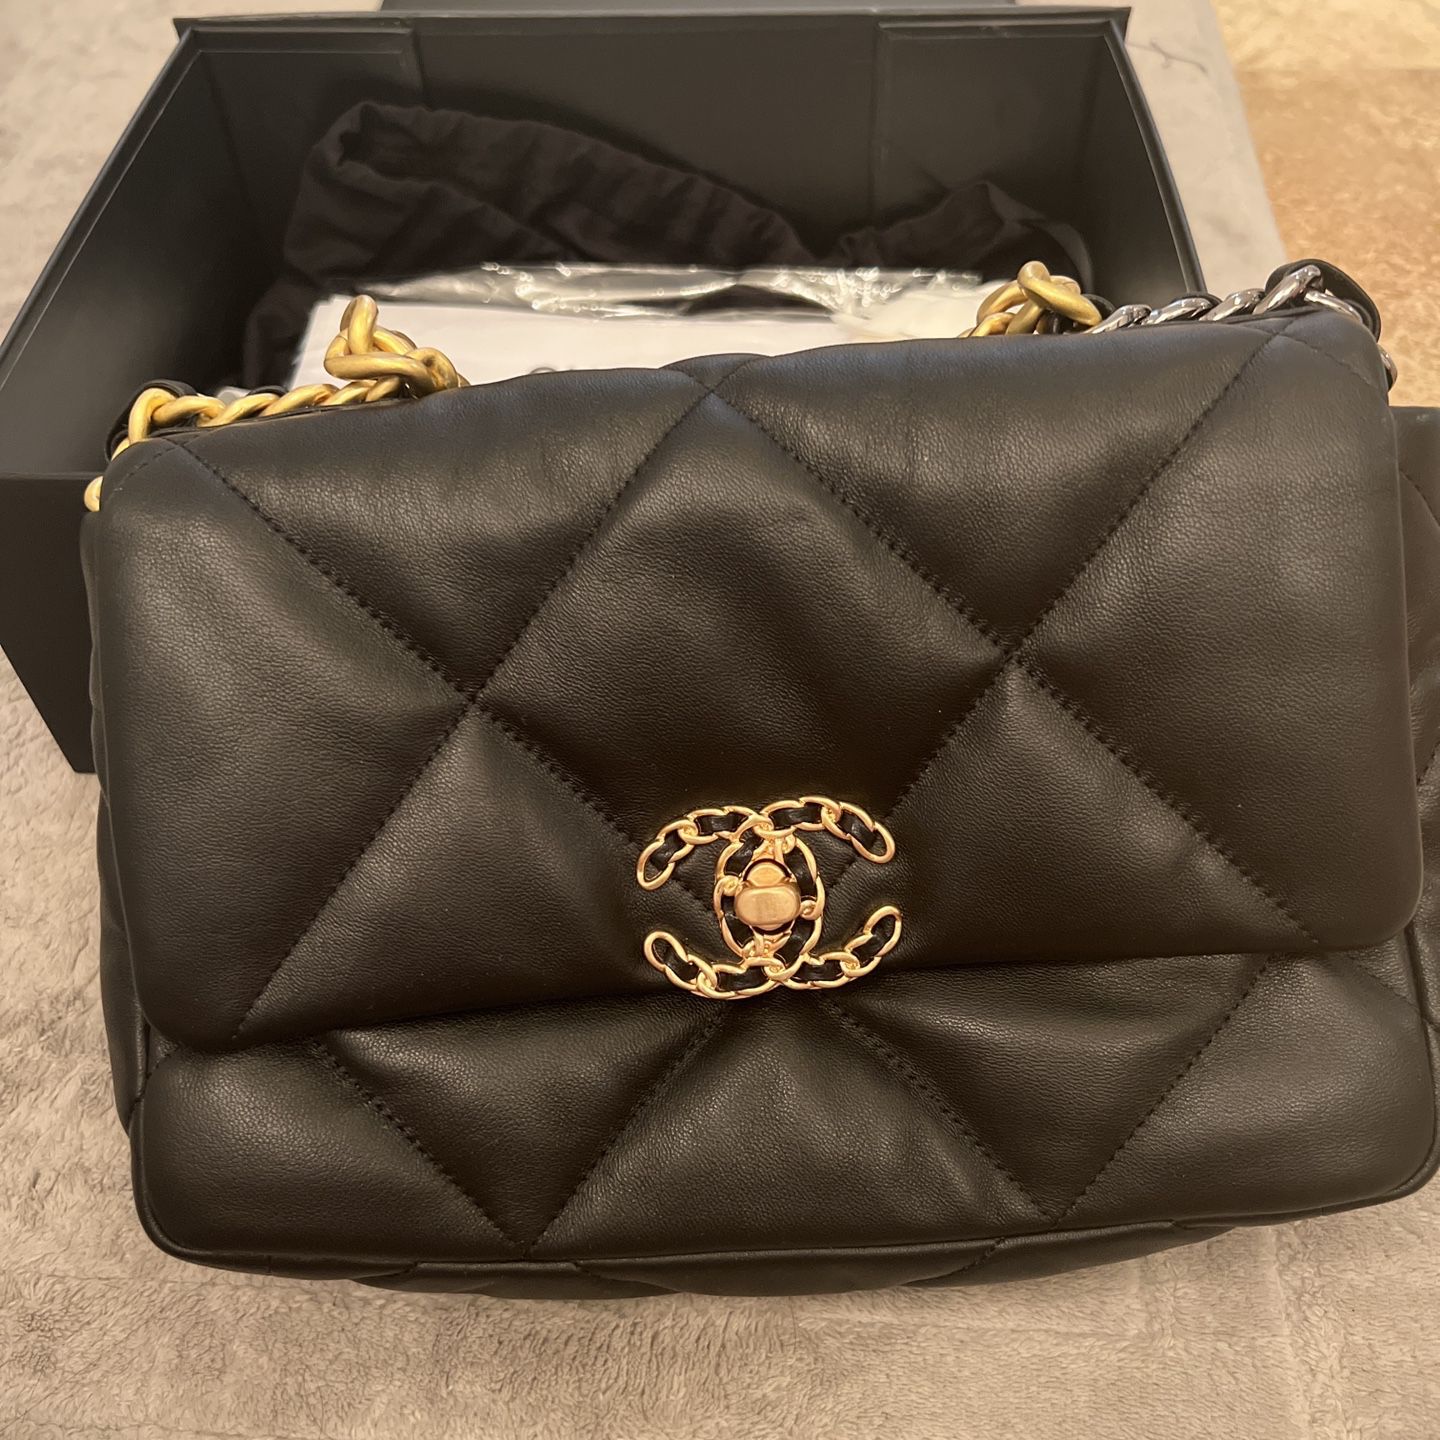 Chanel 19 Flap Bag for Sale in Laguna Hills, CA - OfferUp